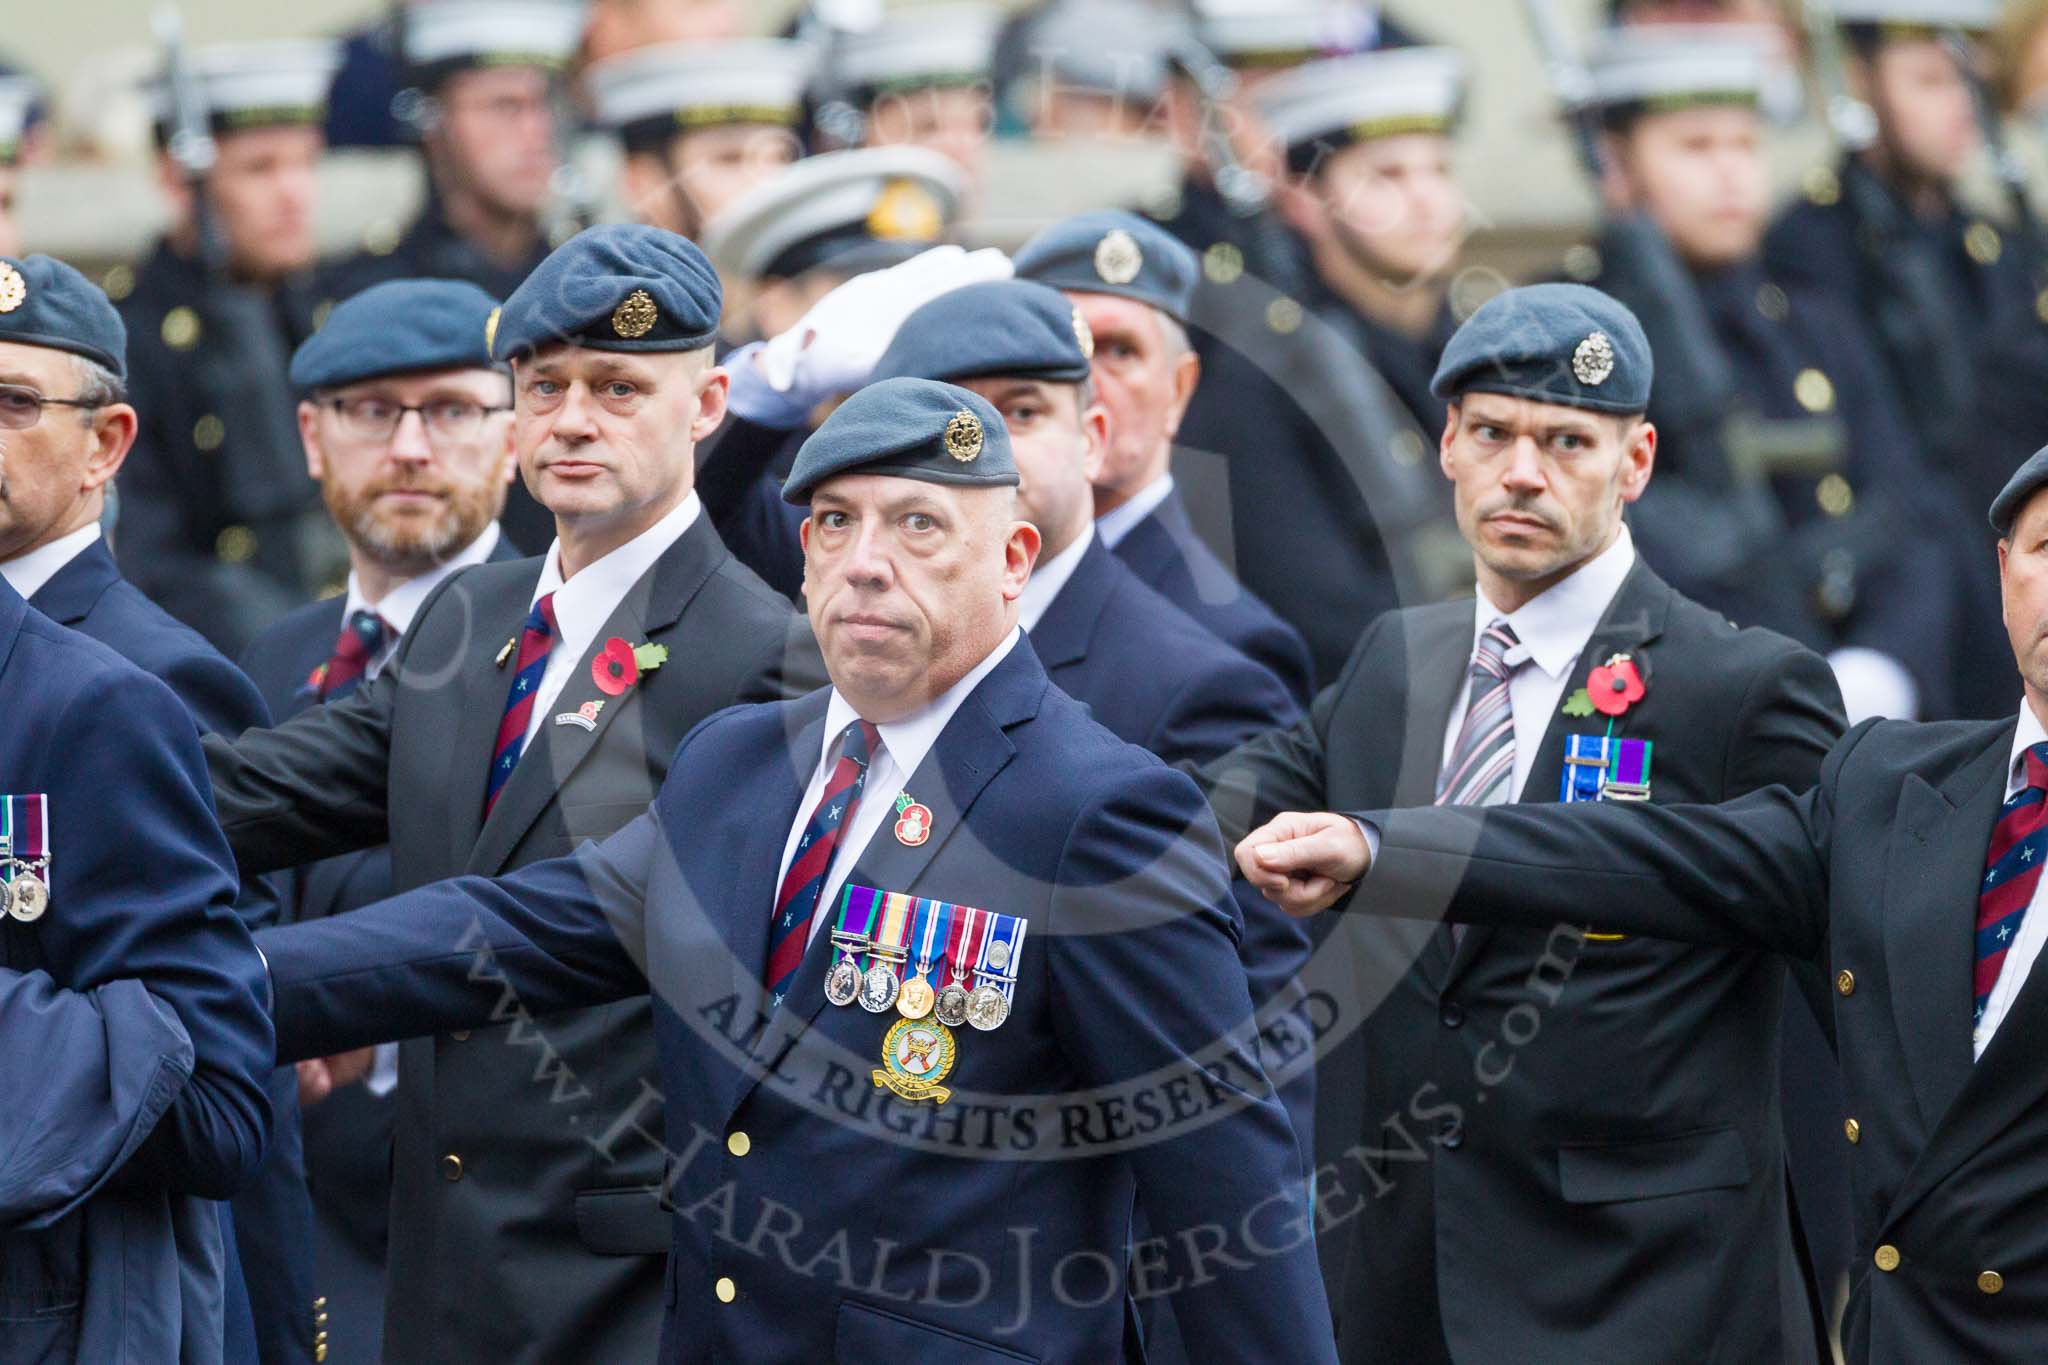 Remembrance Sunday at the Cenotaph 2015: C2, Royal Air Force Regiment Association.
Cenotaph, Whitehall, London SW1,
London,
Greater London,
United Kingdom,
on 08 November 2015 at 11:47, image #424